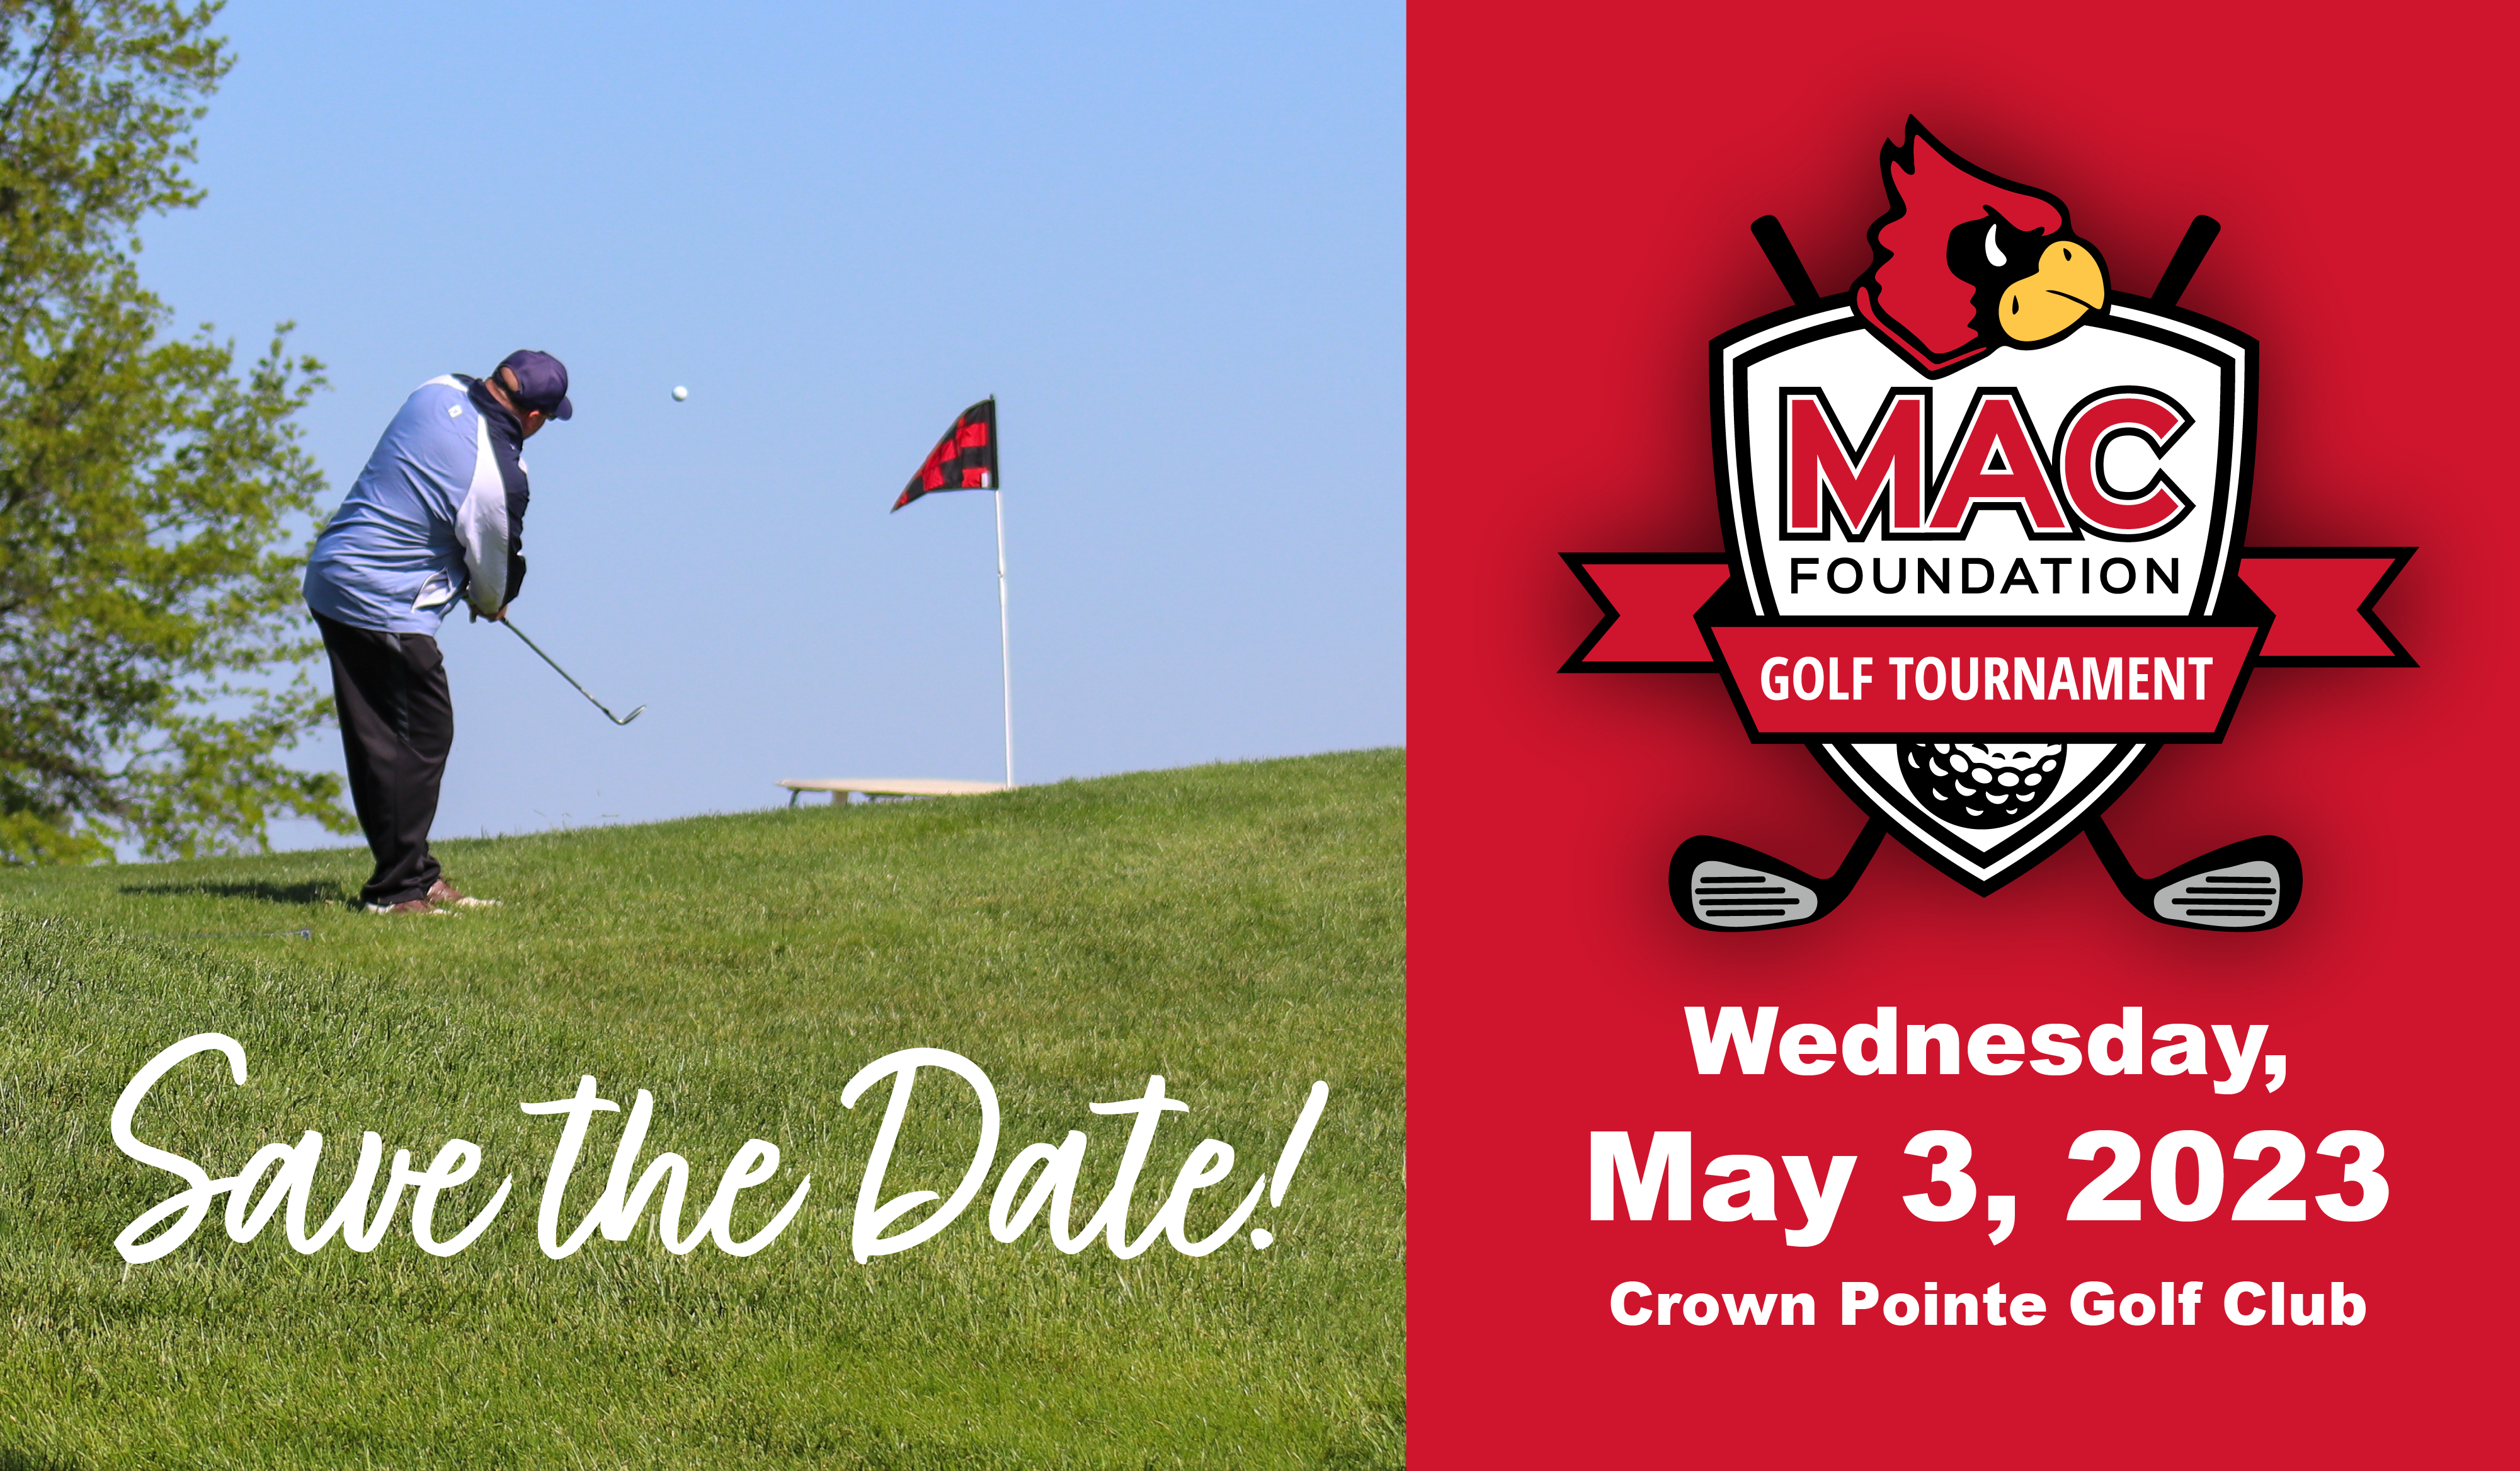 Photo of golfer, MAC Foundation Golf Tournament logo Text says "Save the Date! Wed, May 3, 2023, Crown Pointe Golf Club"